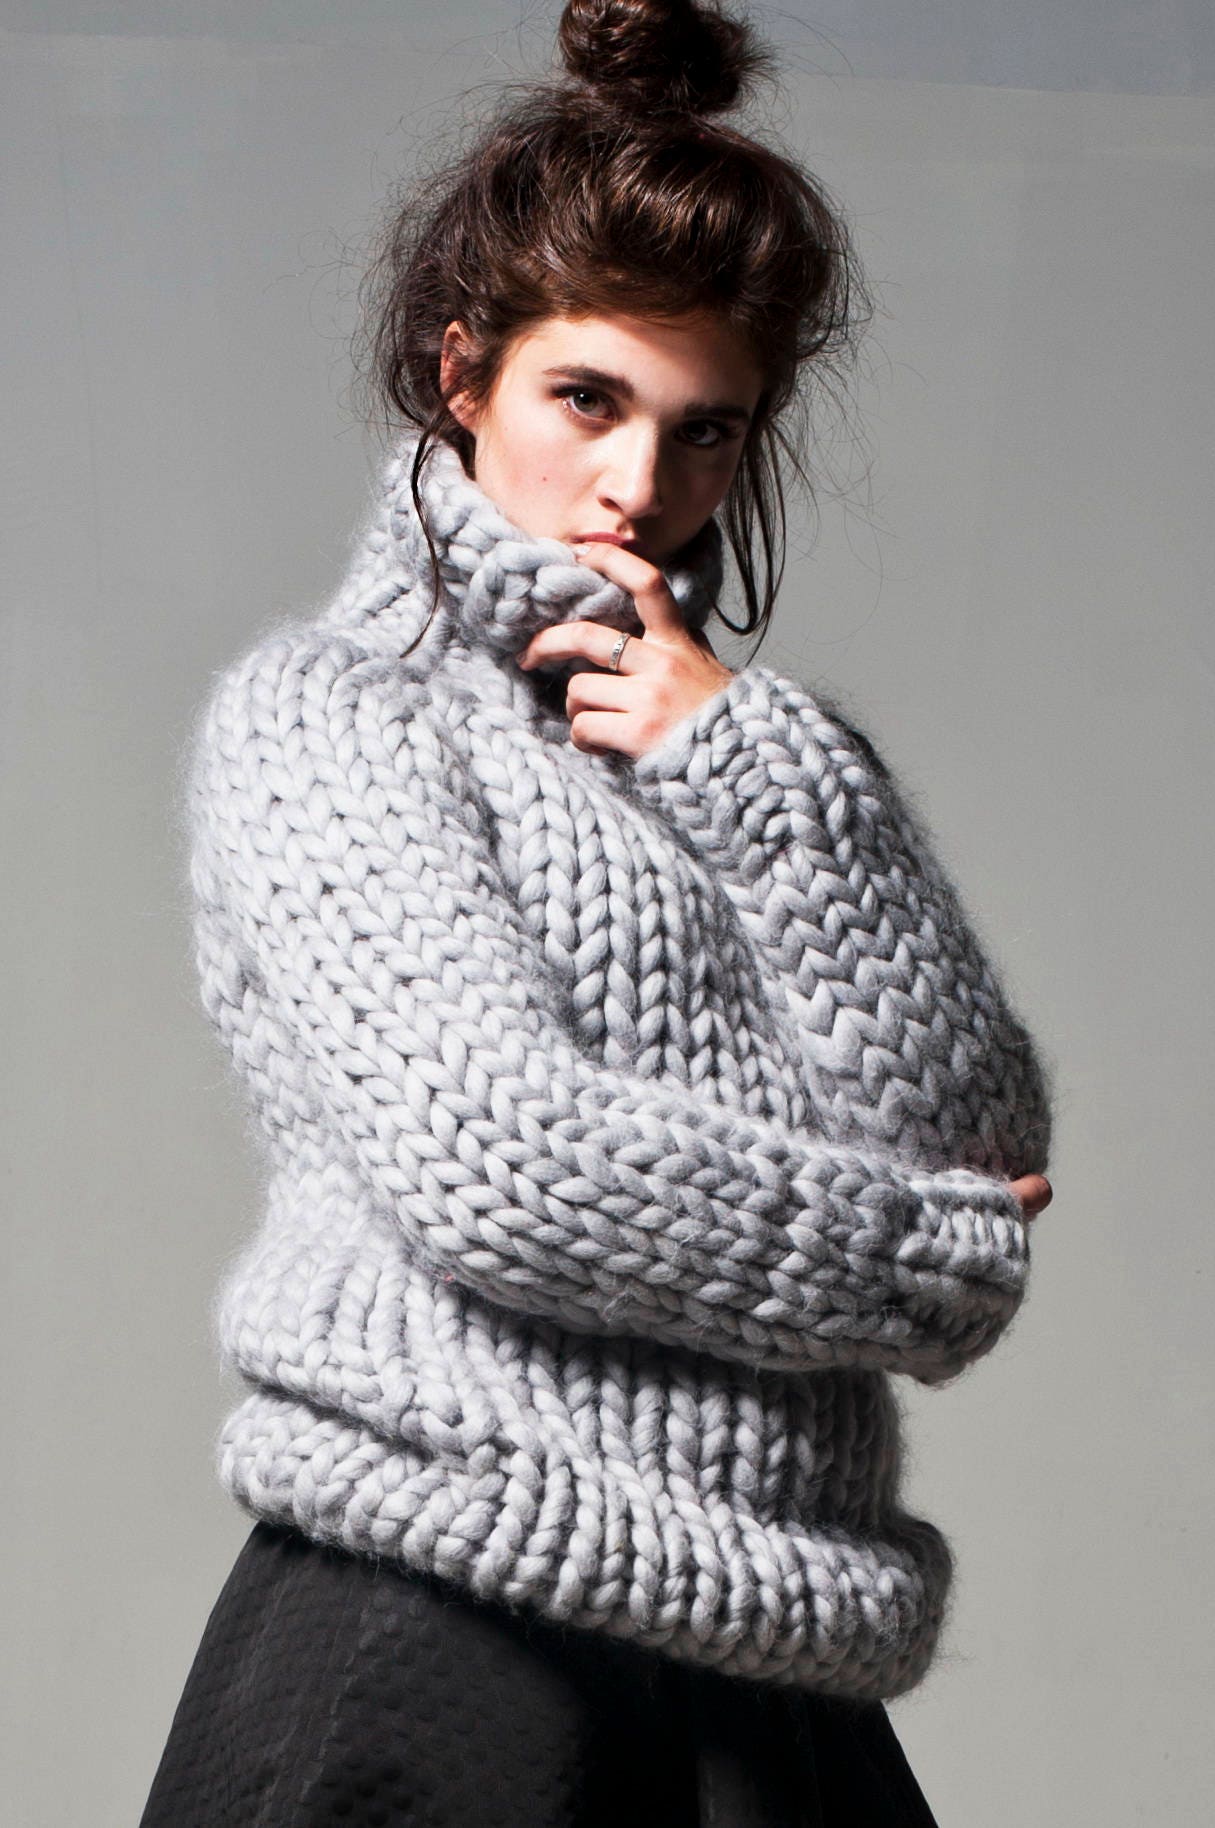 Chunky knit. Big knitted turtleneck sweater. Chunky sweater.